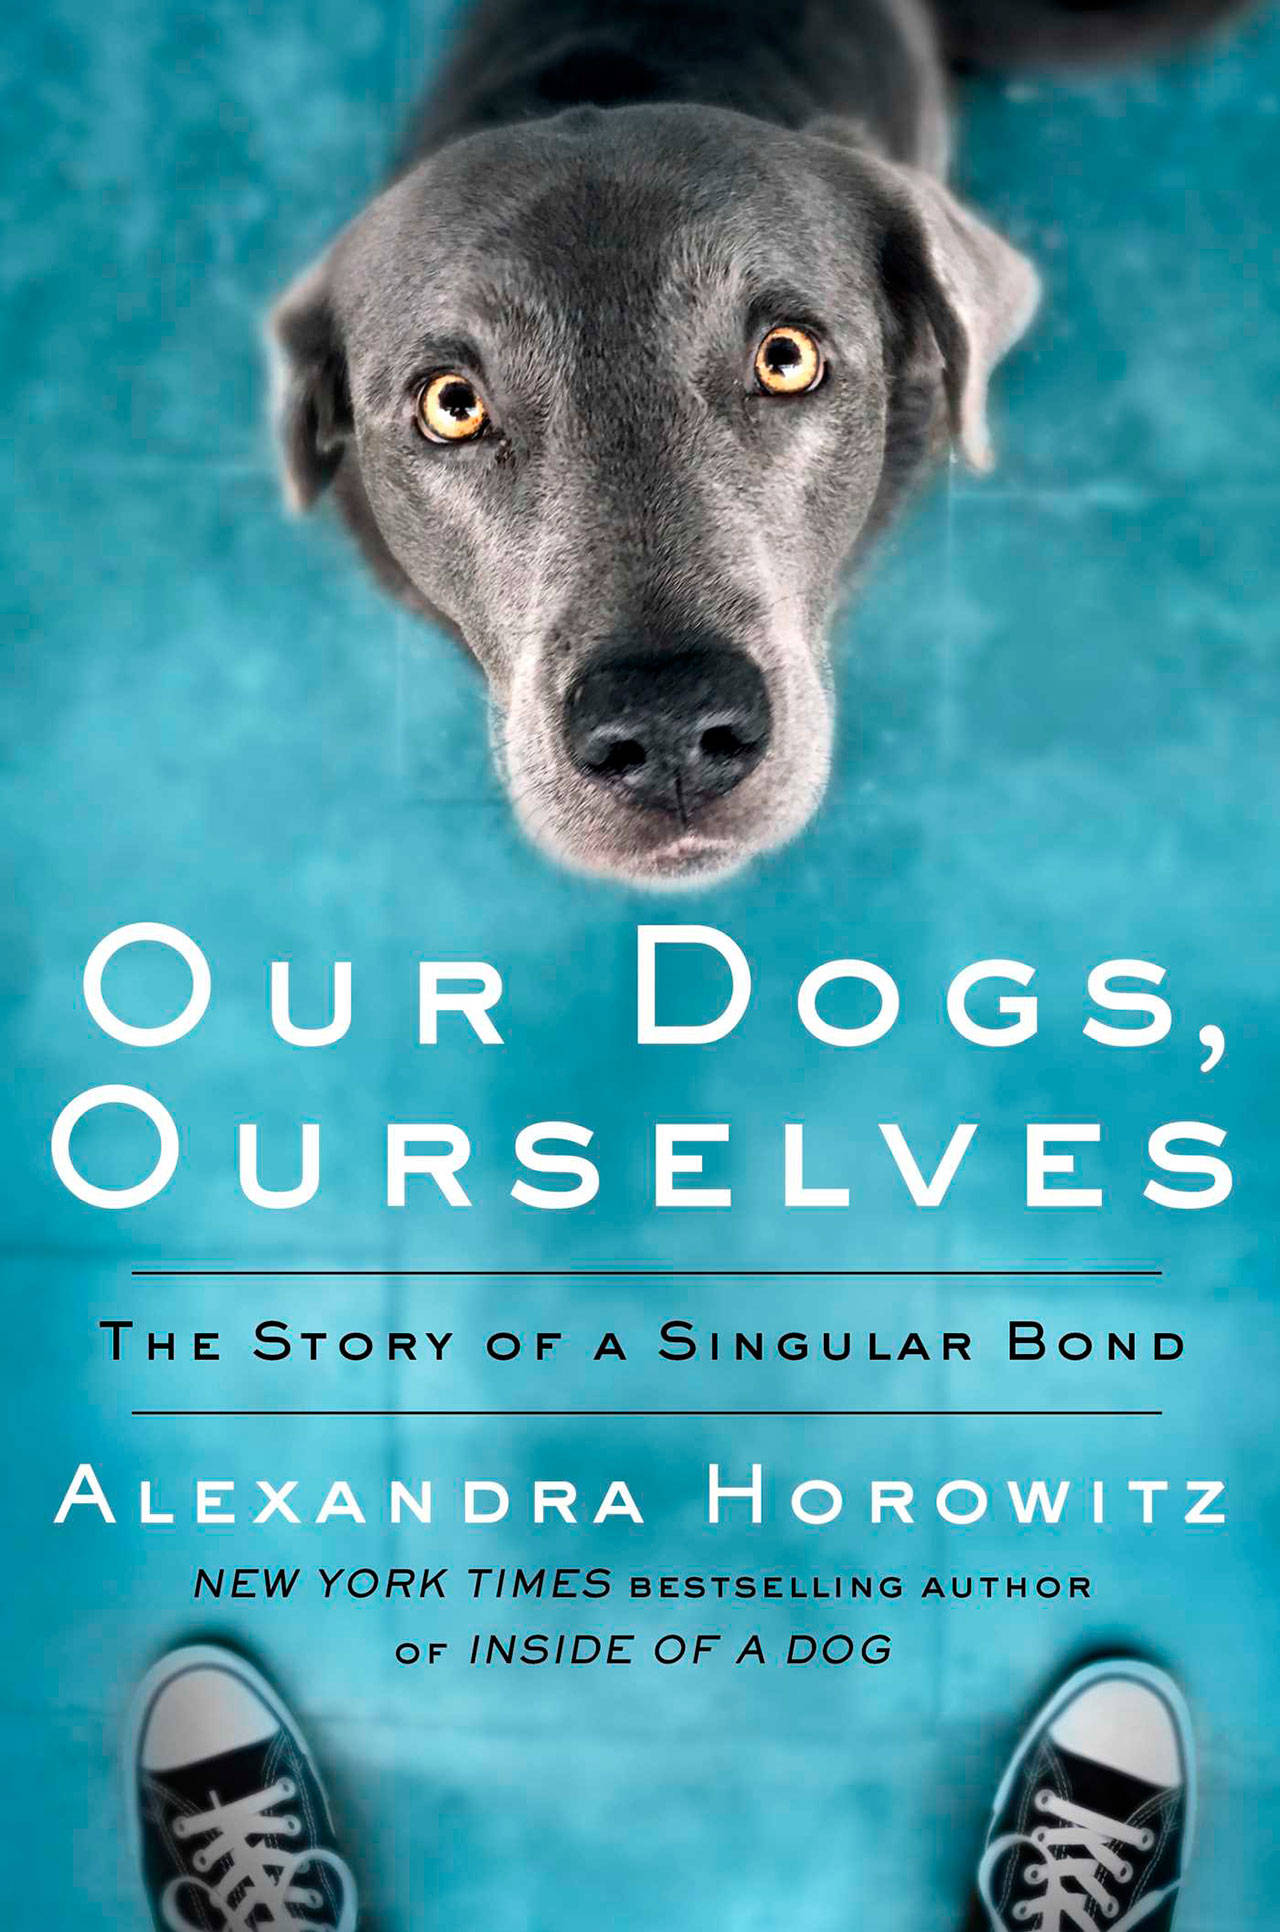 Image courtesy of Eagle Harbor Book Company | Alexandra Horowitz will visit Eagle Harbor Book Company at 3 p.m. on Sunday, Sept. 29 to discus her newest book, released earlier this month, “Our Dogs, Ourselves: The Story of a Singular Bond.”